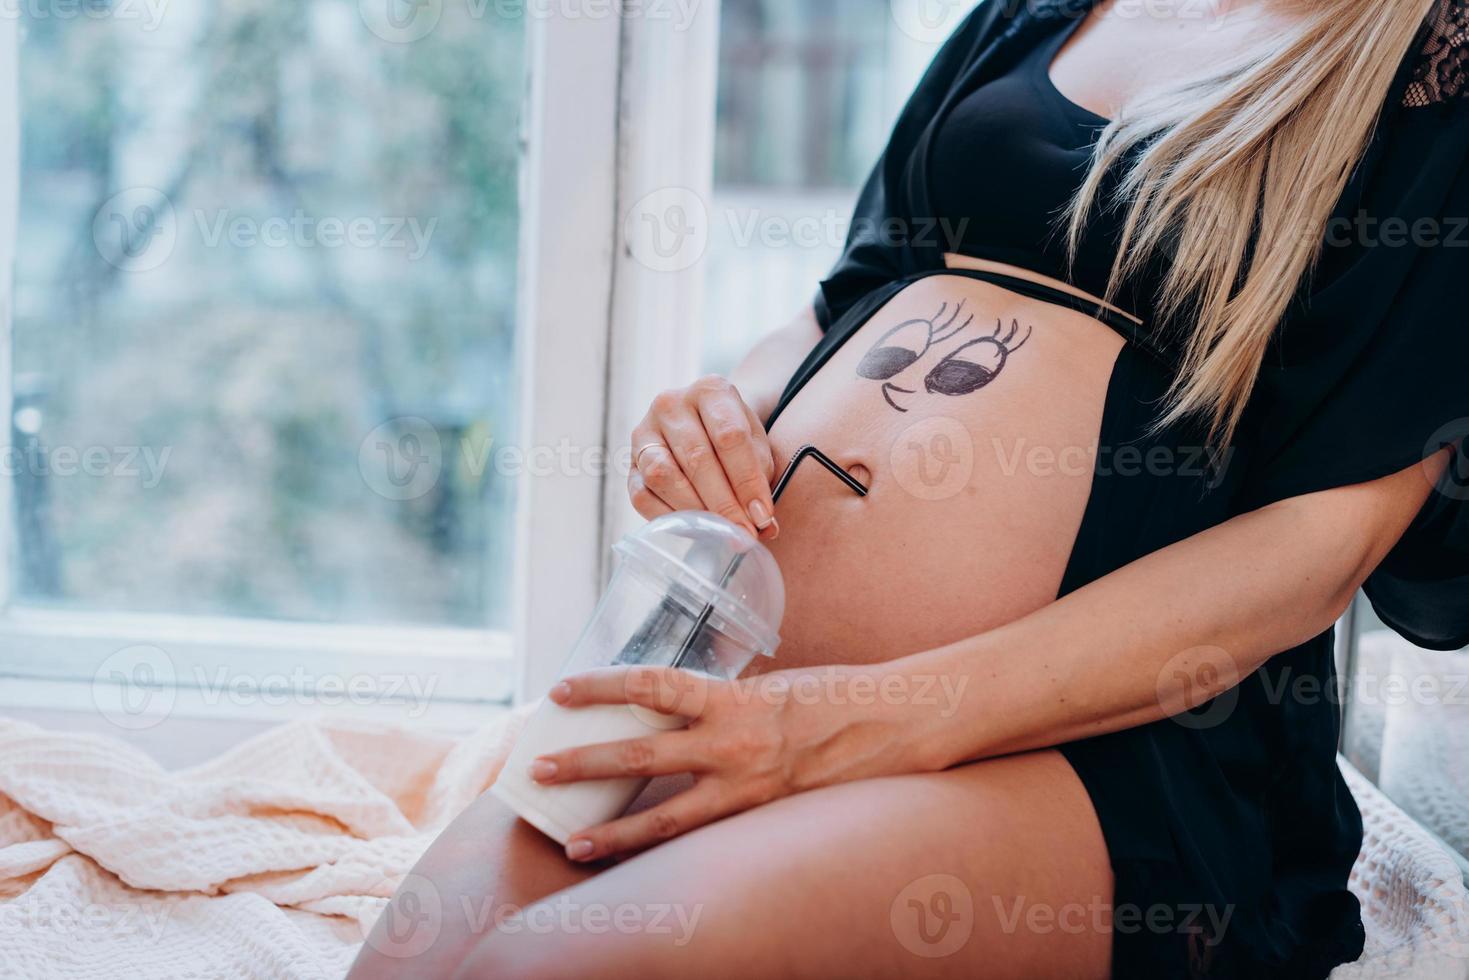 Funny picture on pregnant belly photo